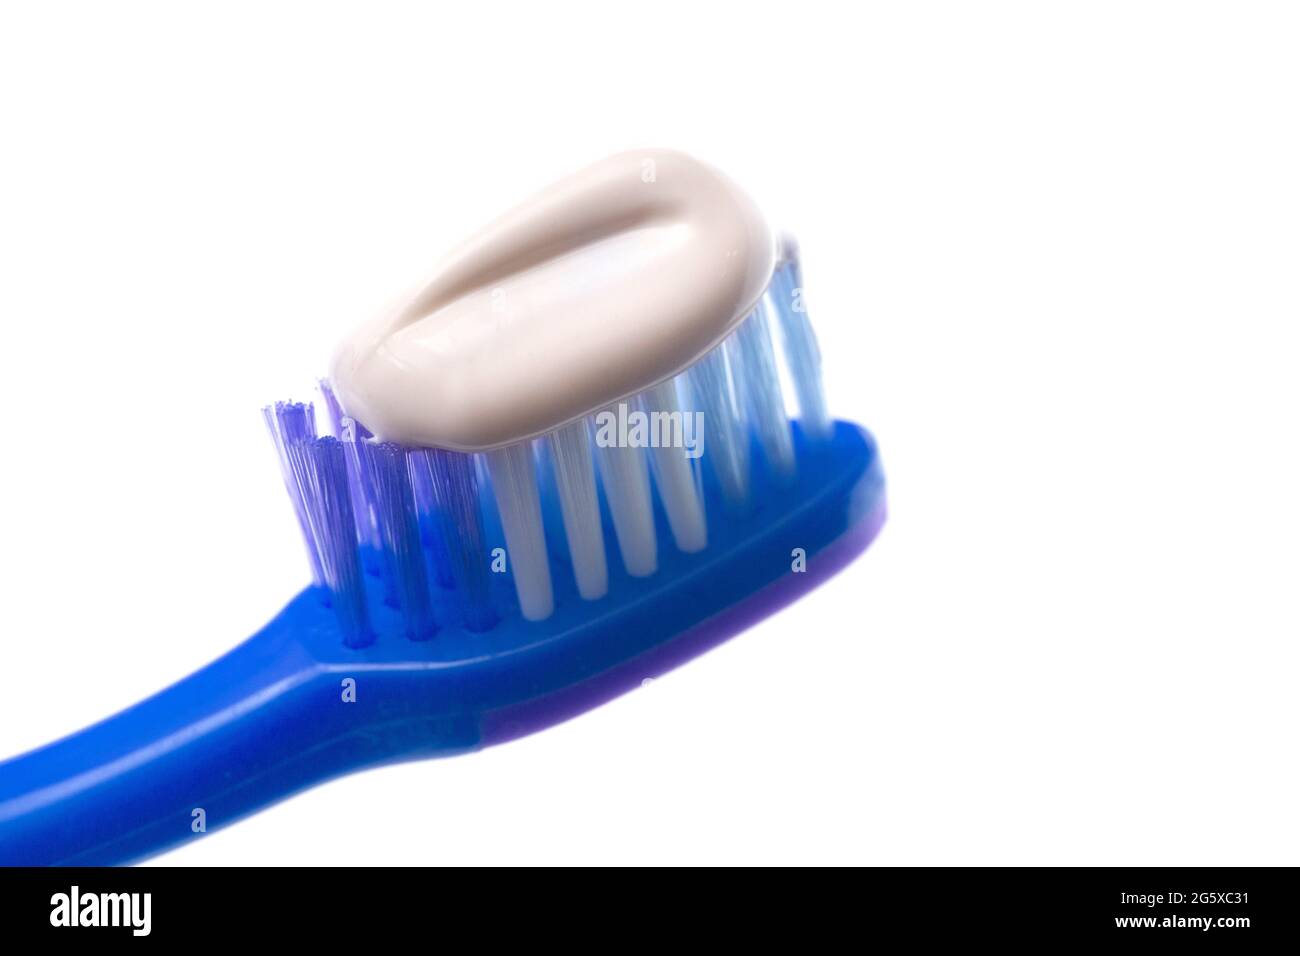 A Simple Toothbrush on a White Background with Toothpaste Applied to ...